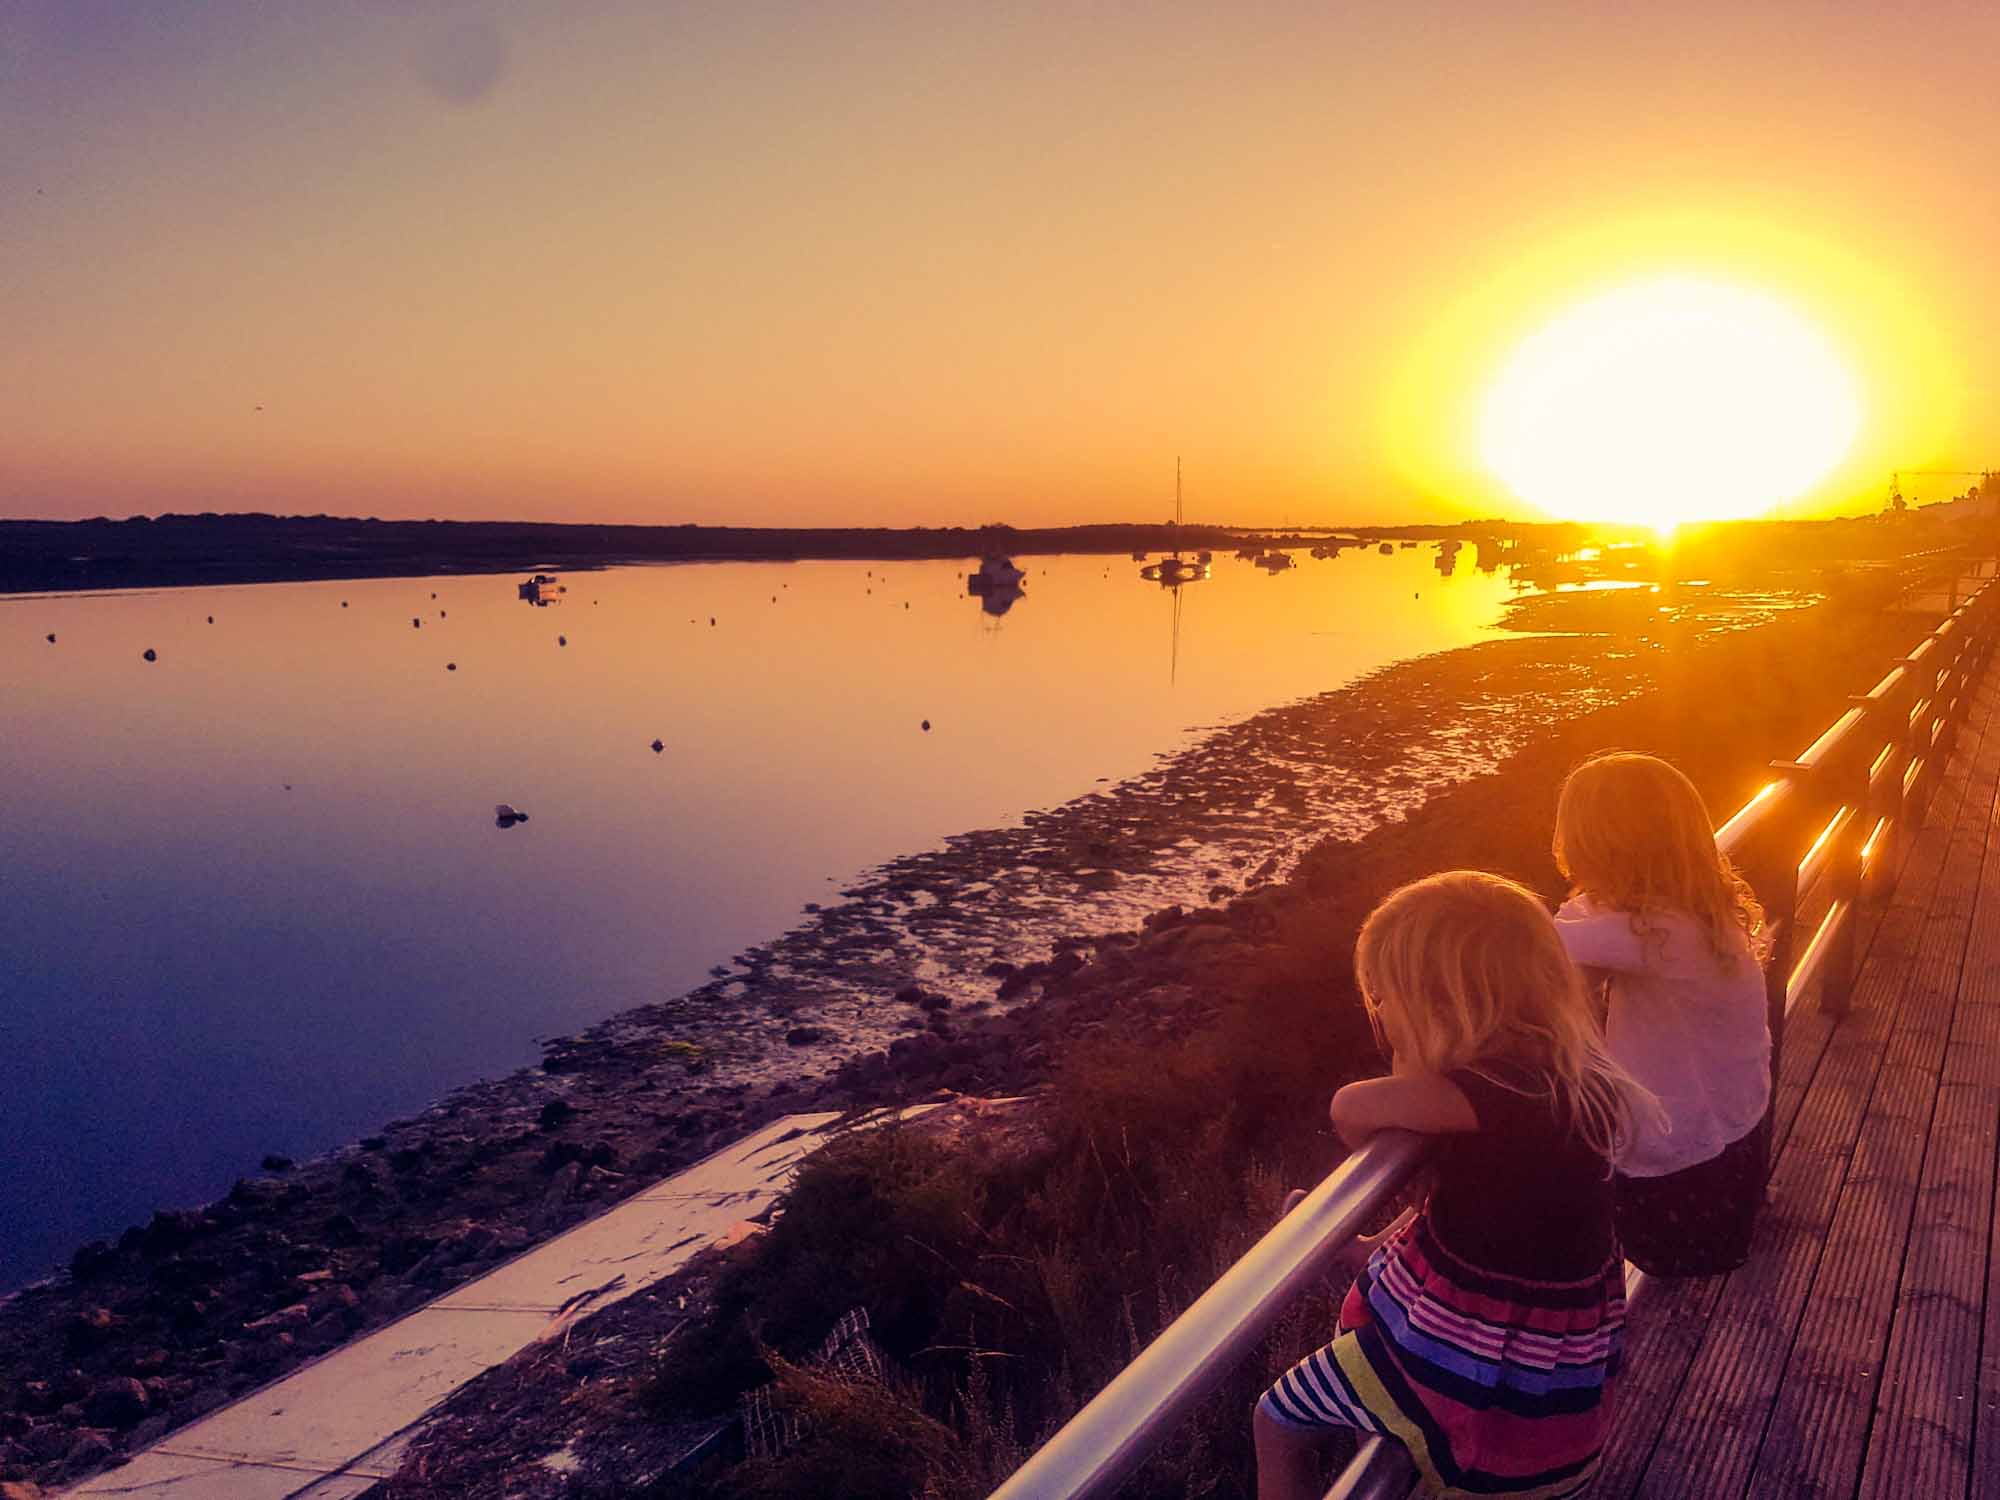 2 girls sat on metal rails of a fence, looking out over water with boats on, at sunset